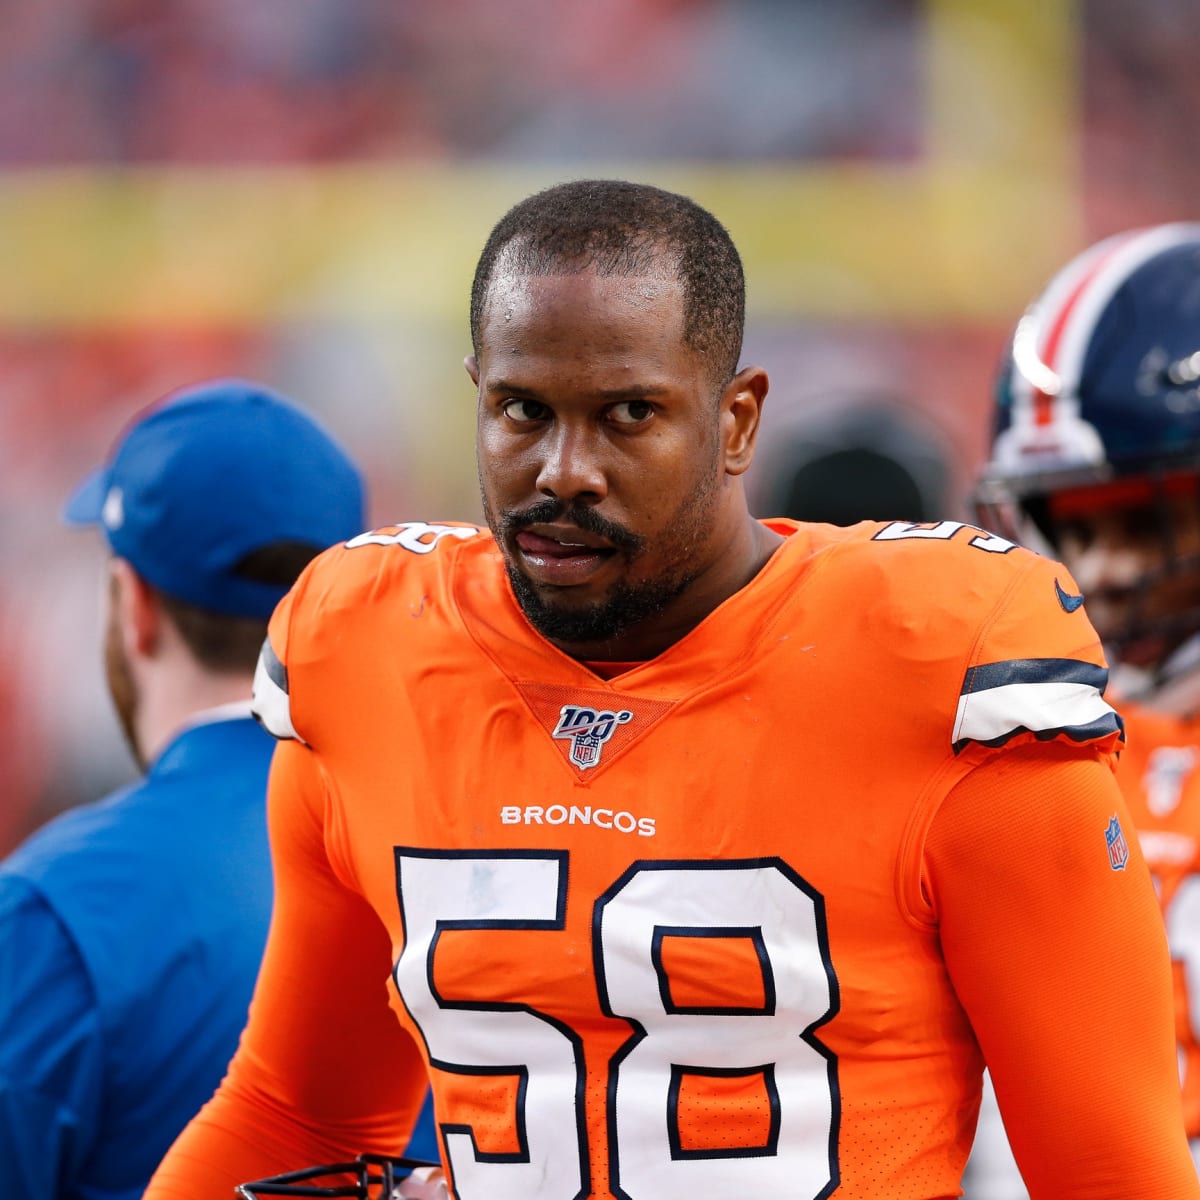 Von Miller is dominating in every way for the Broncos this season